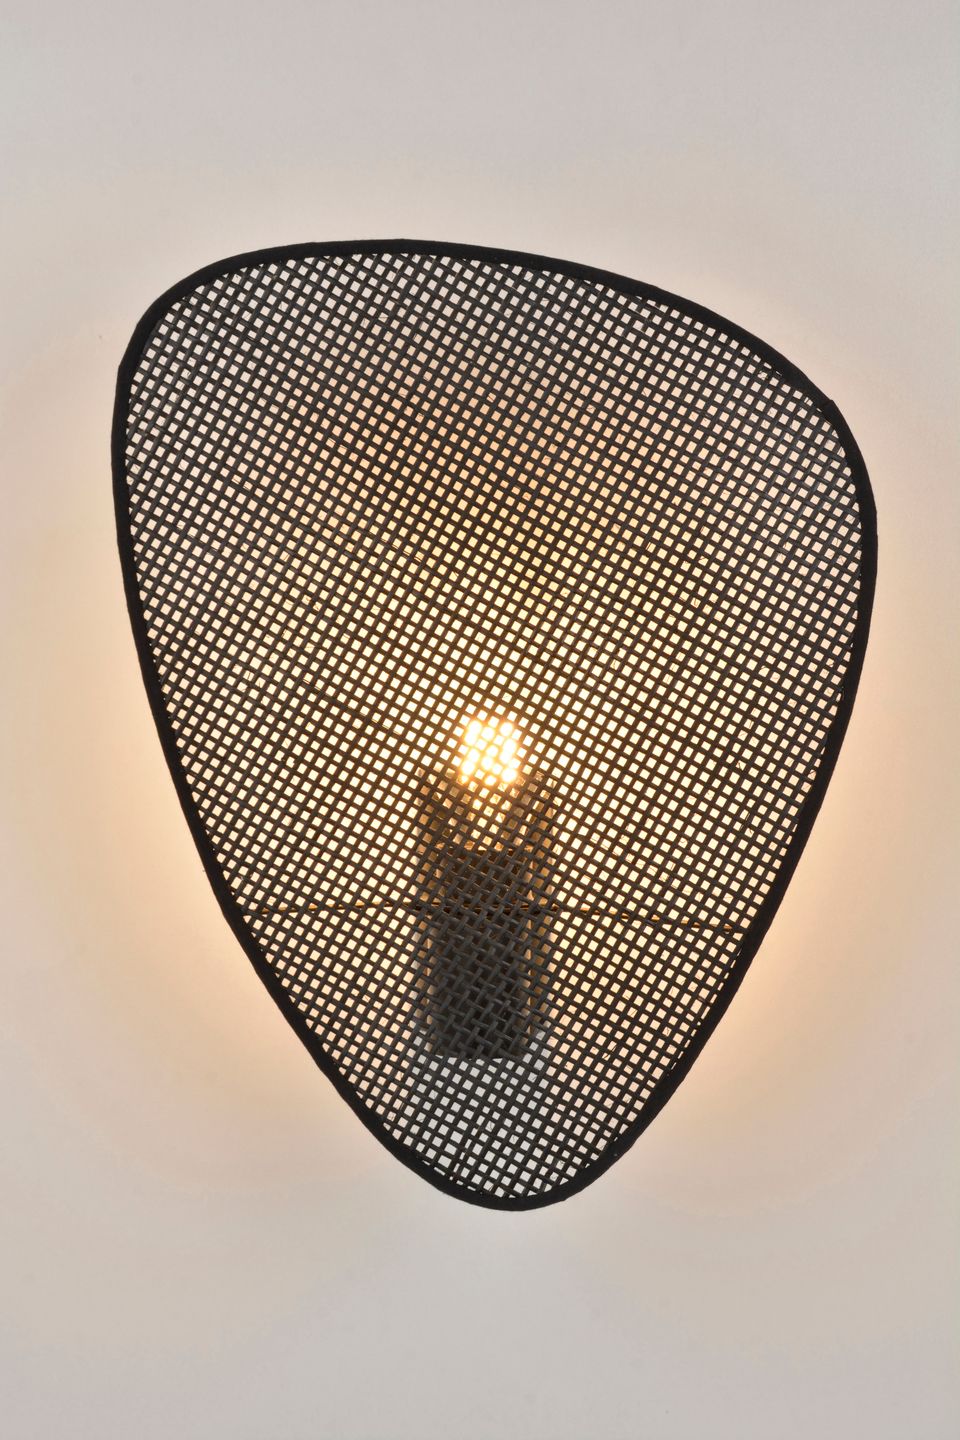 Wall Lamp (Sconce) SCREEN by Market Set